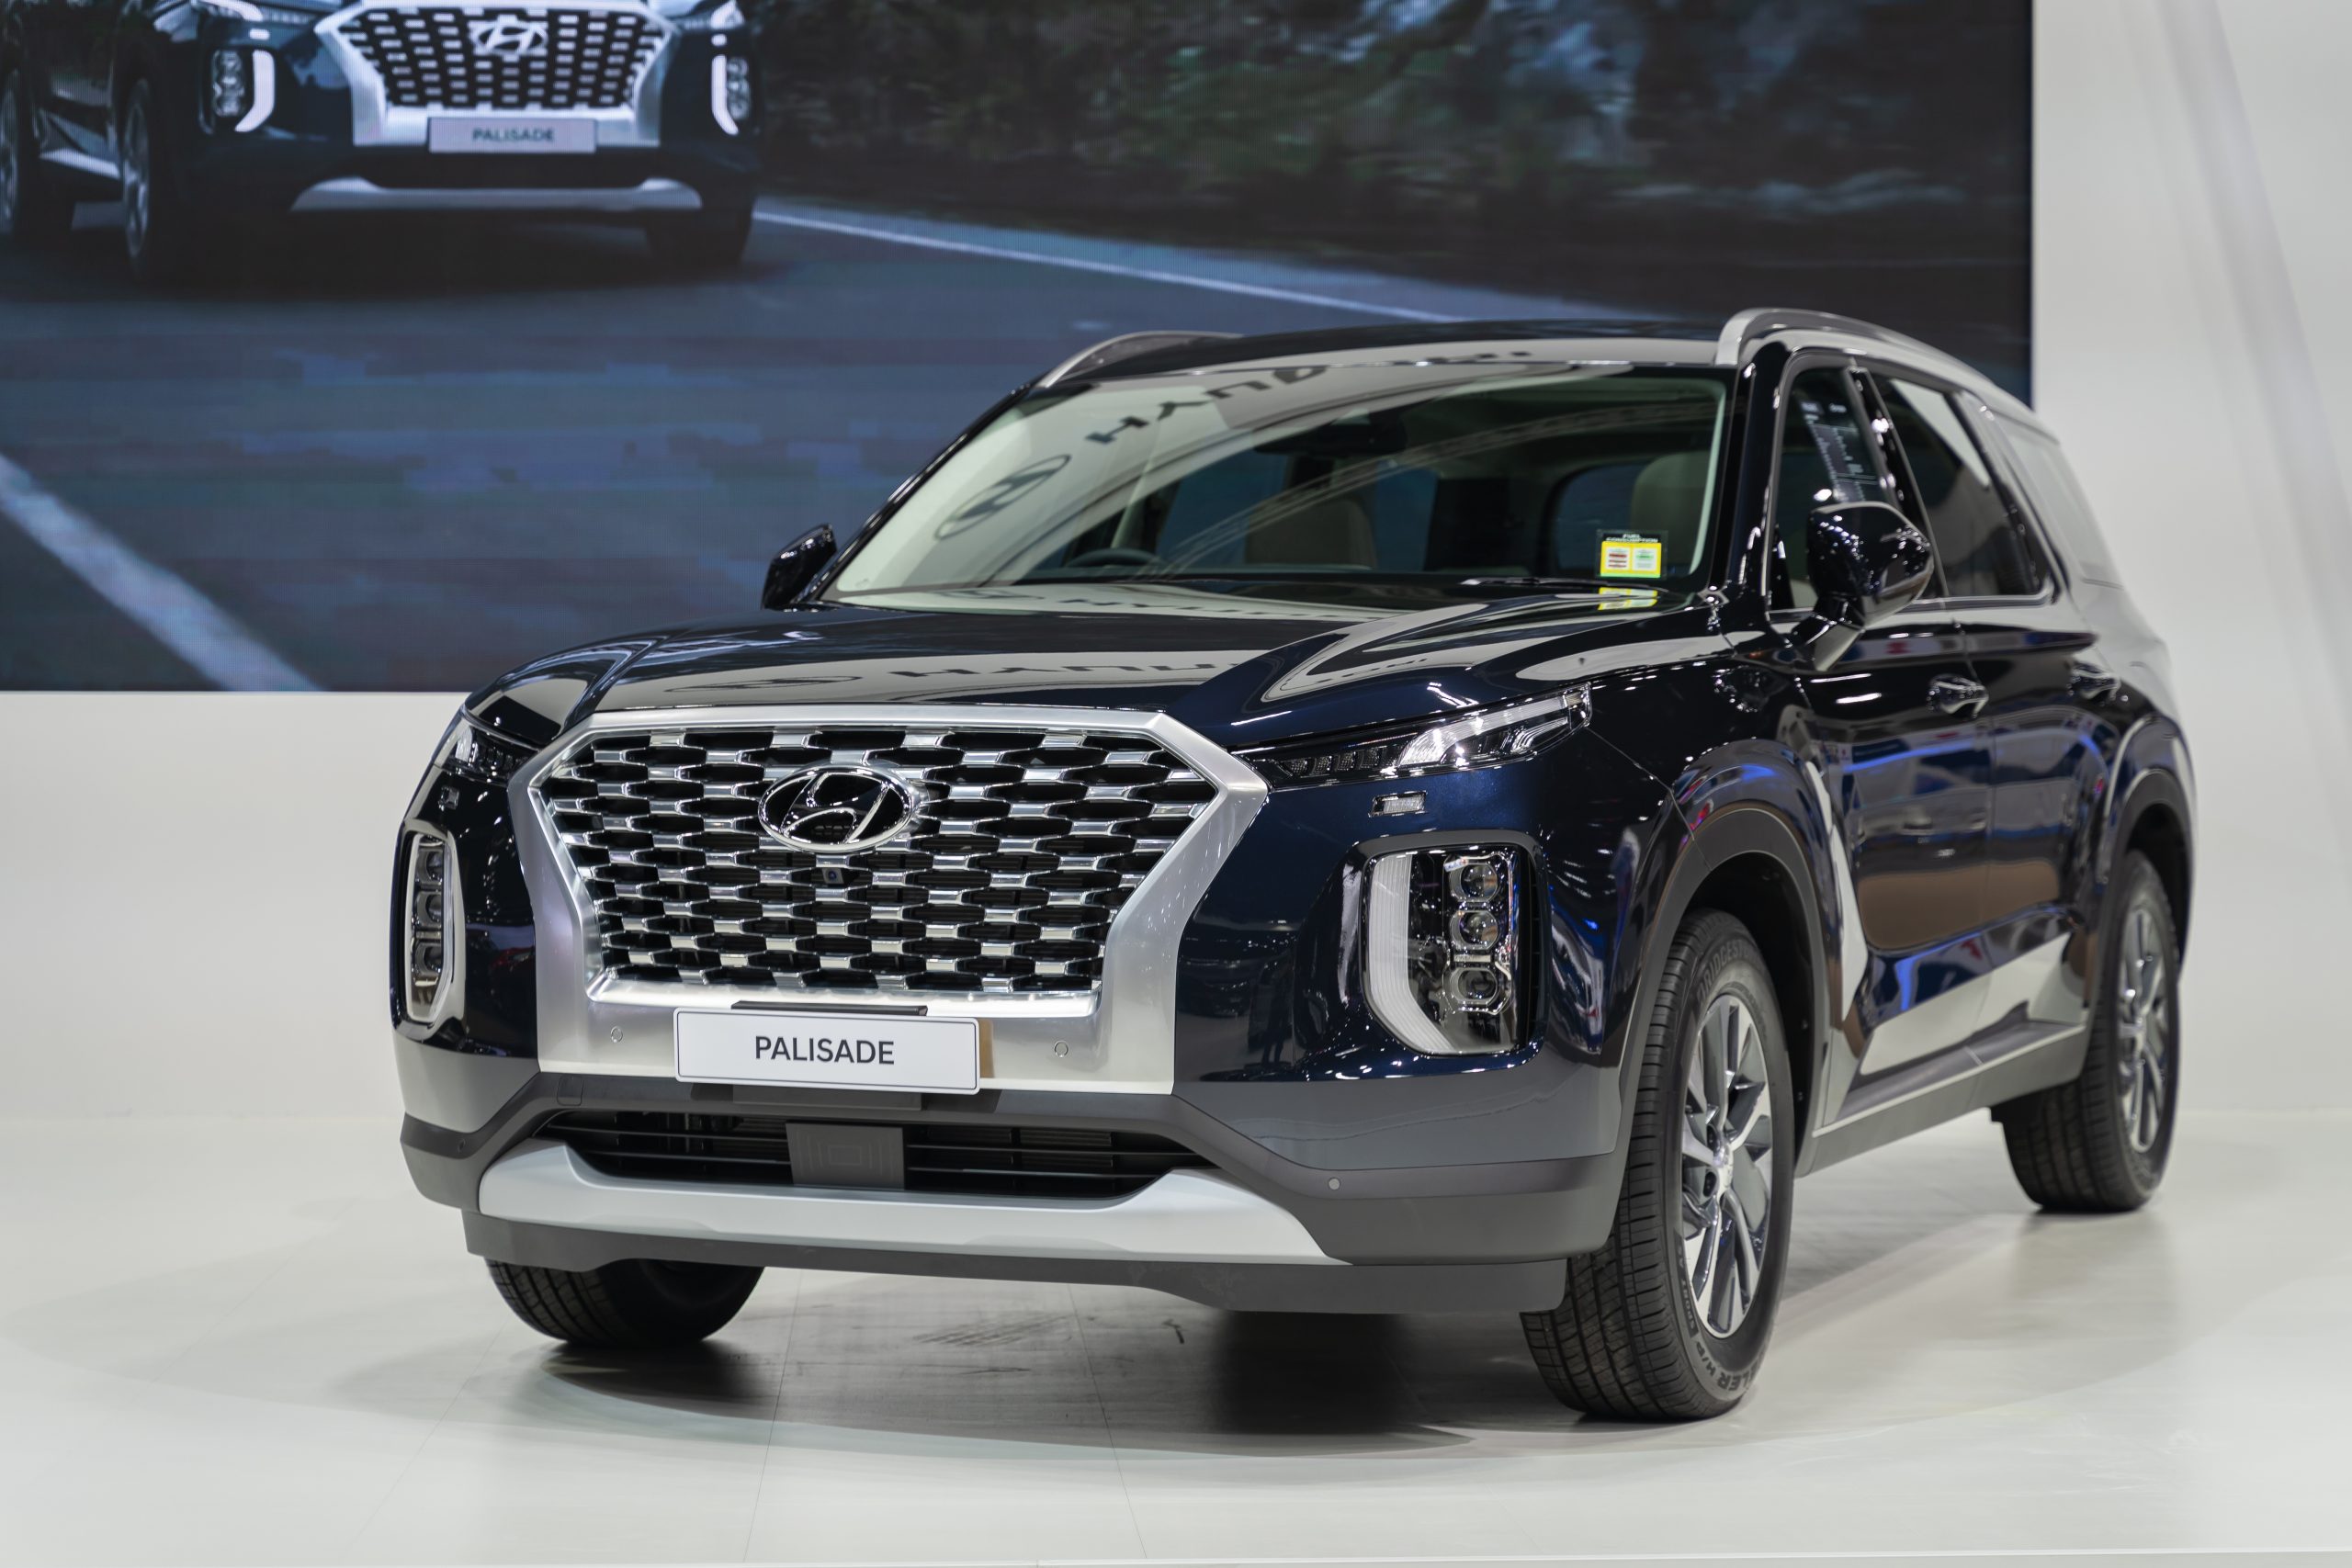 A class action lawsuit alleges certain Hyundai Palisade models with leather seats or trim emit a foul odor.